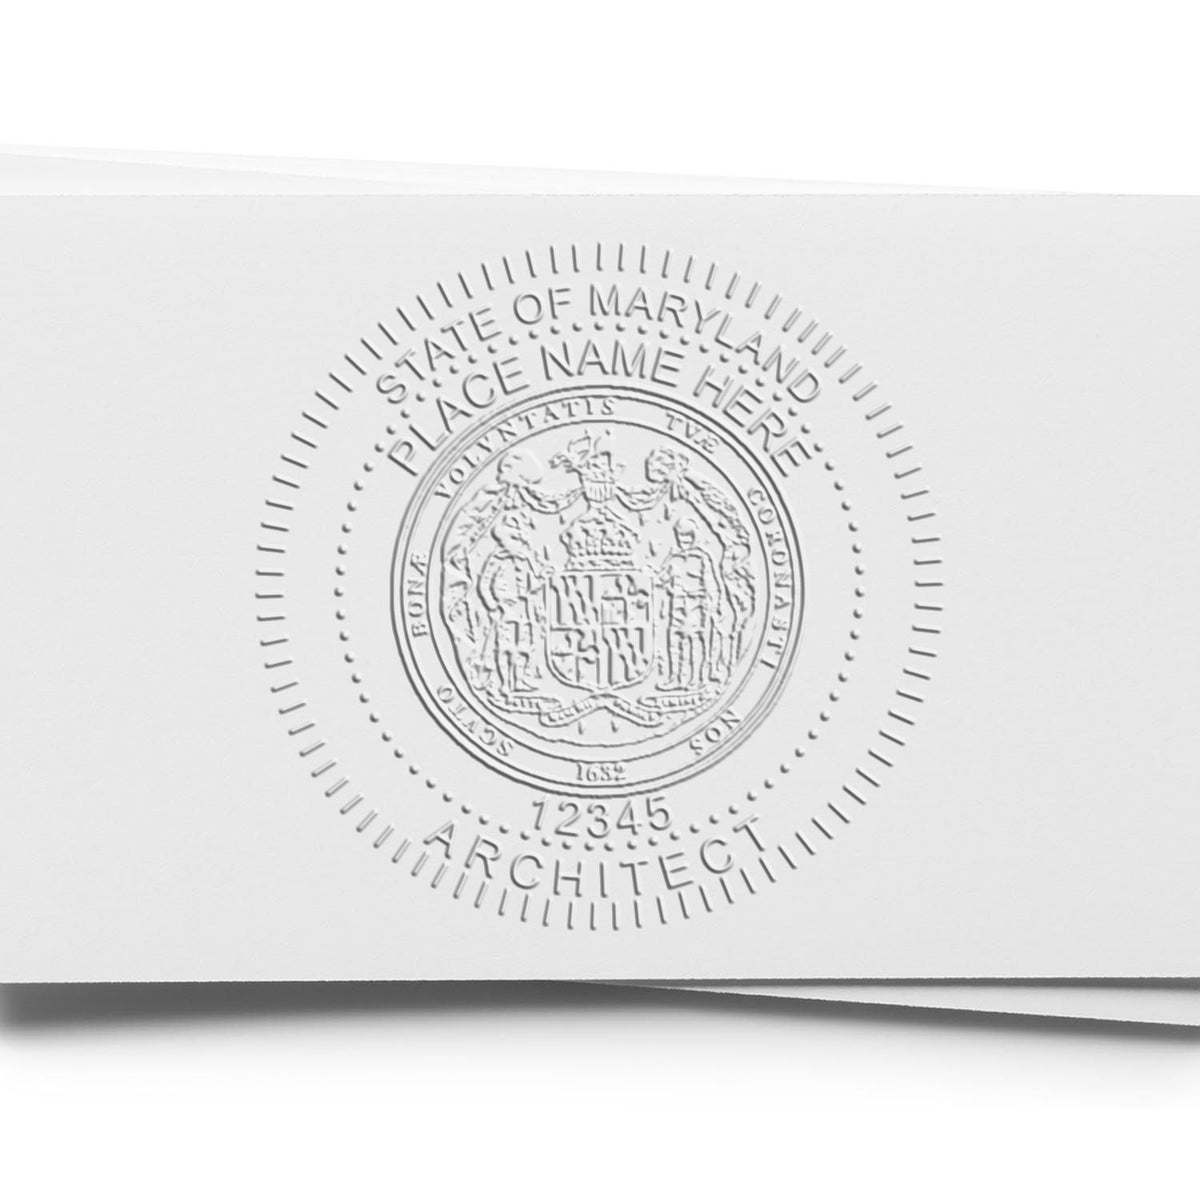 The State of Maryland Long Reach Architectural Embossing Seal stamp impression comes to life with a crisp, detailed photo on paper - showcasing true professional quality.